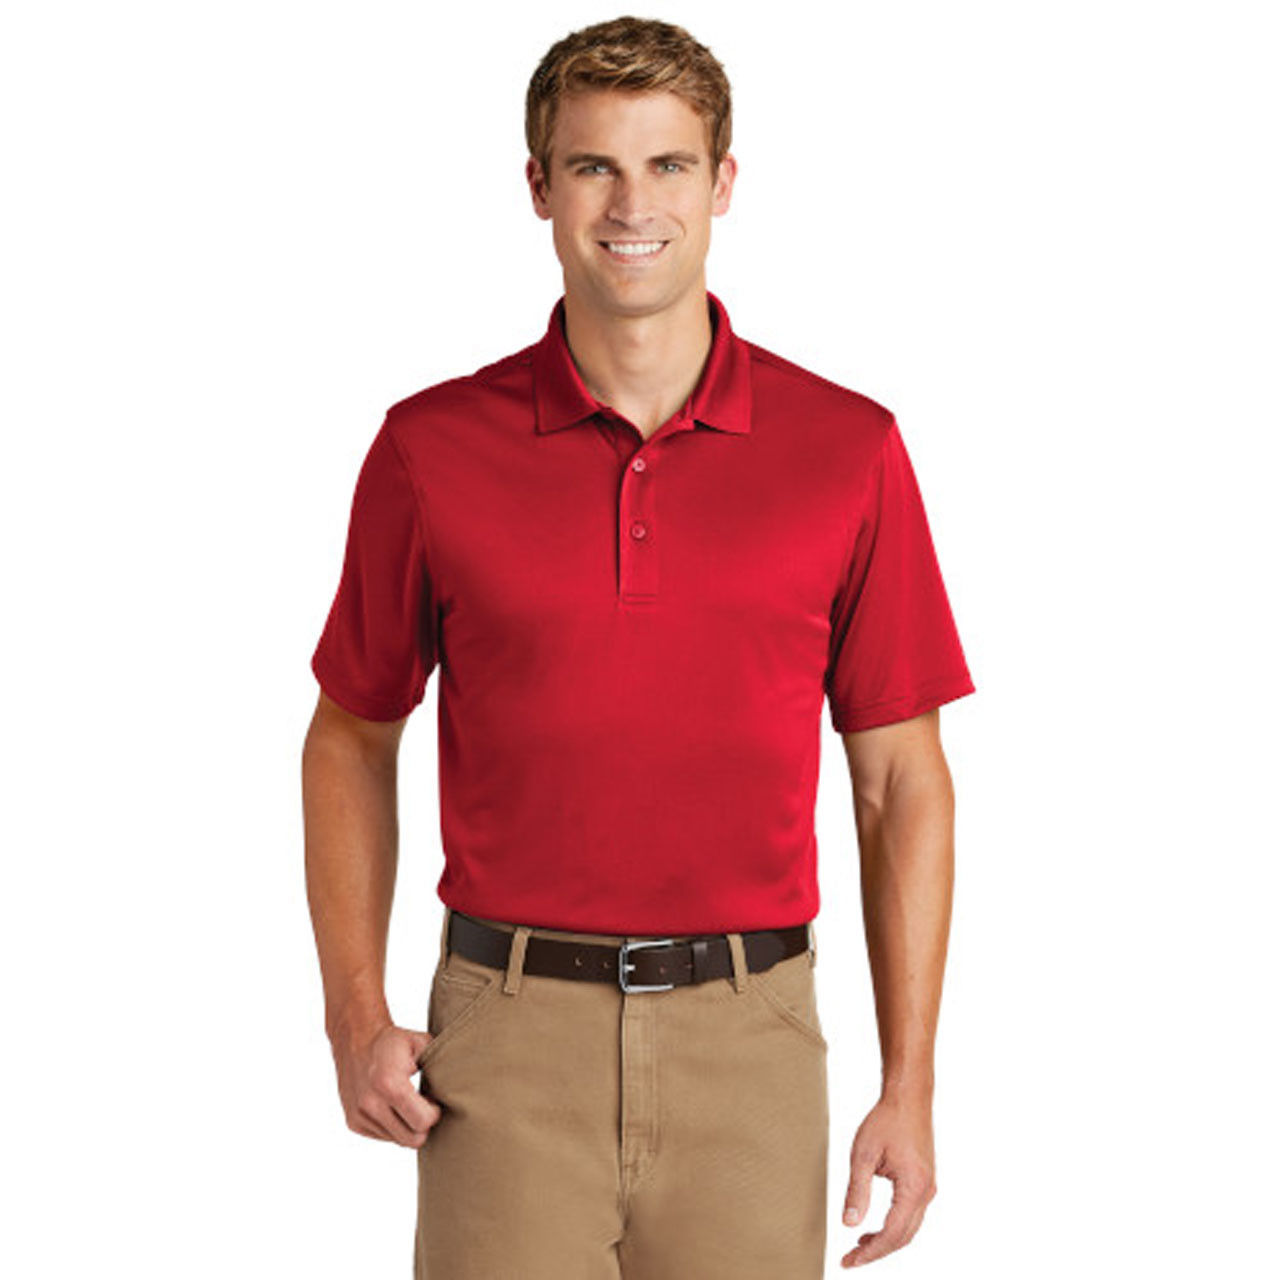 Does the alternative wholesale polo s for men have the same number of buttons?